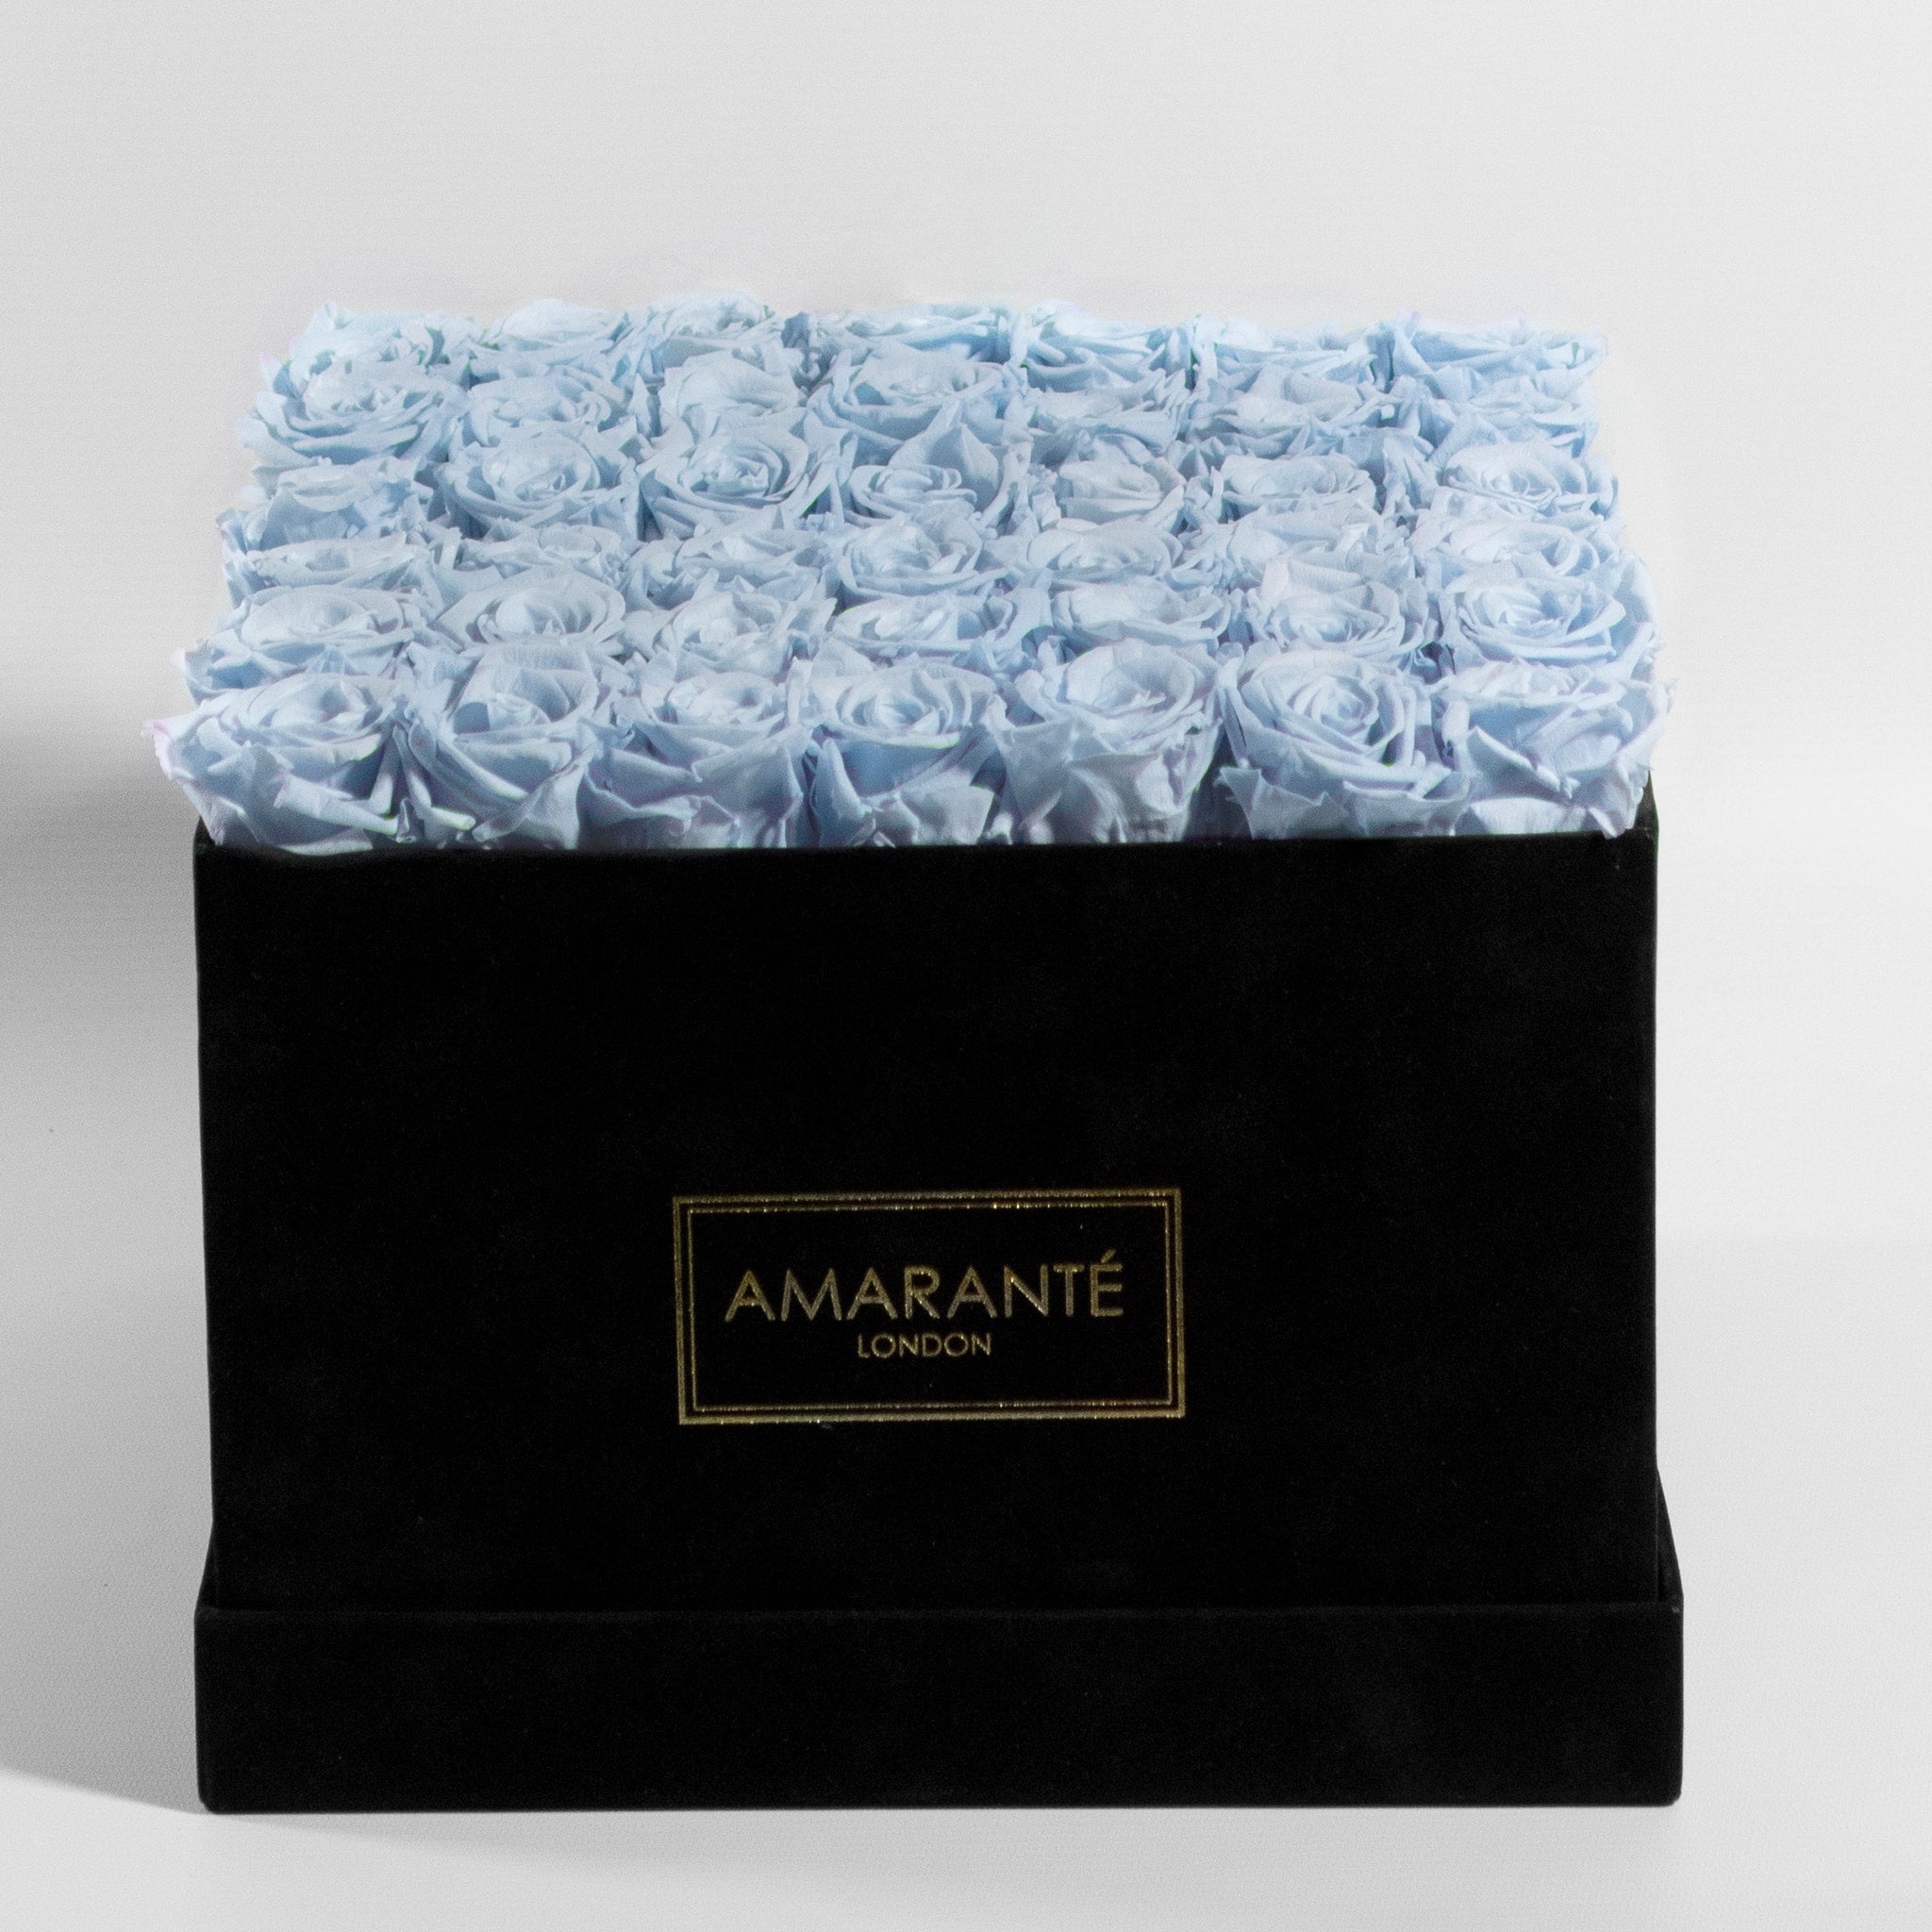 Sophisticated arrangement of light blue forever roses in a suave square black suede hatbox.